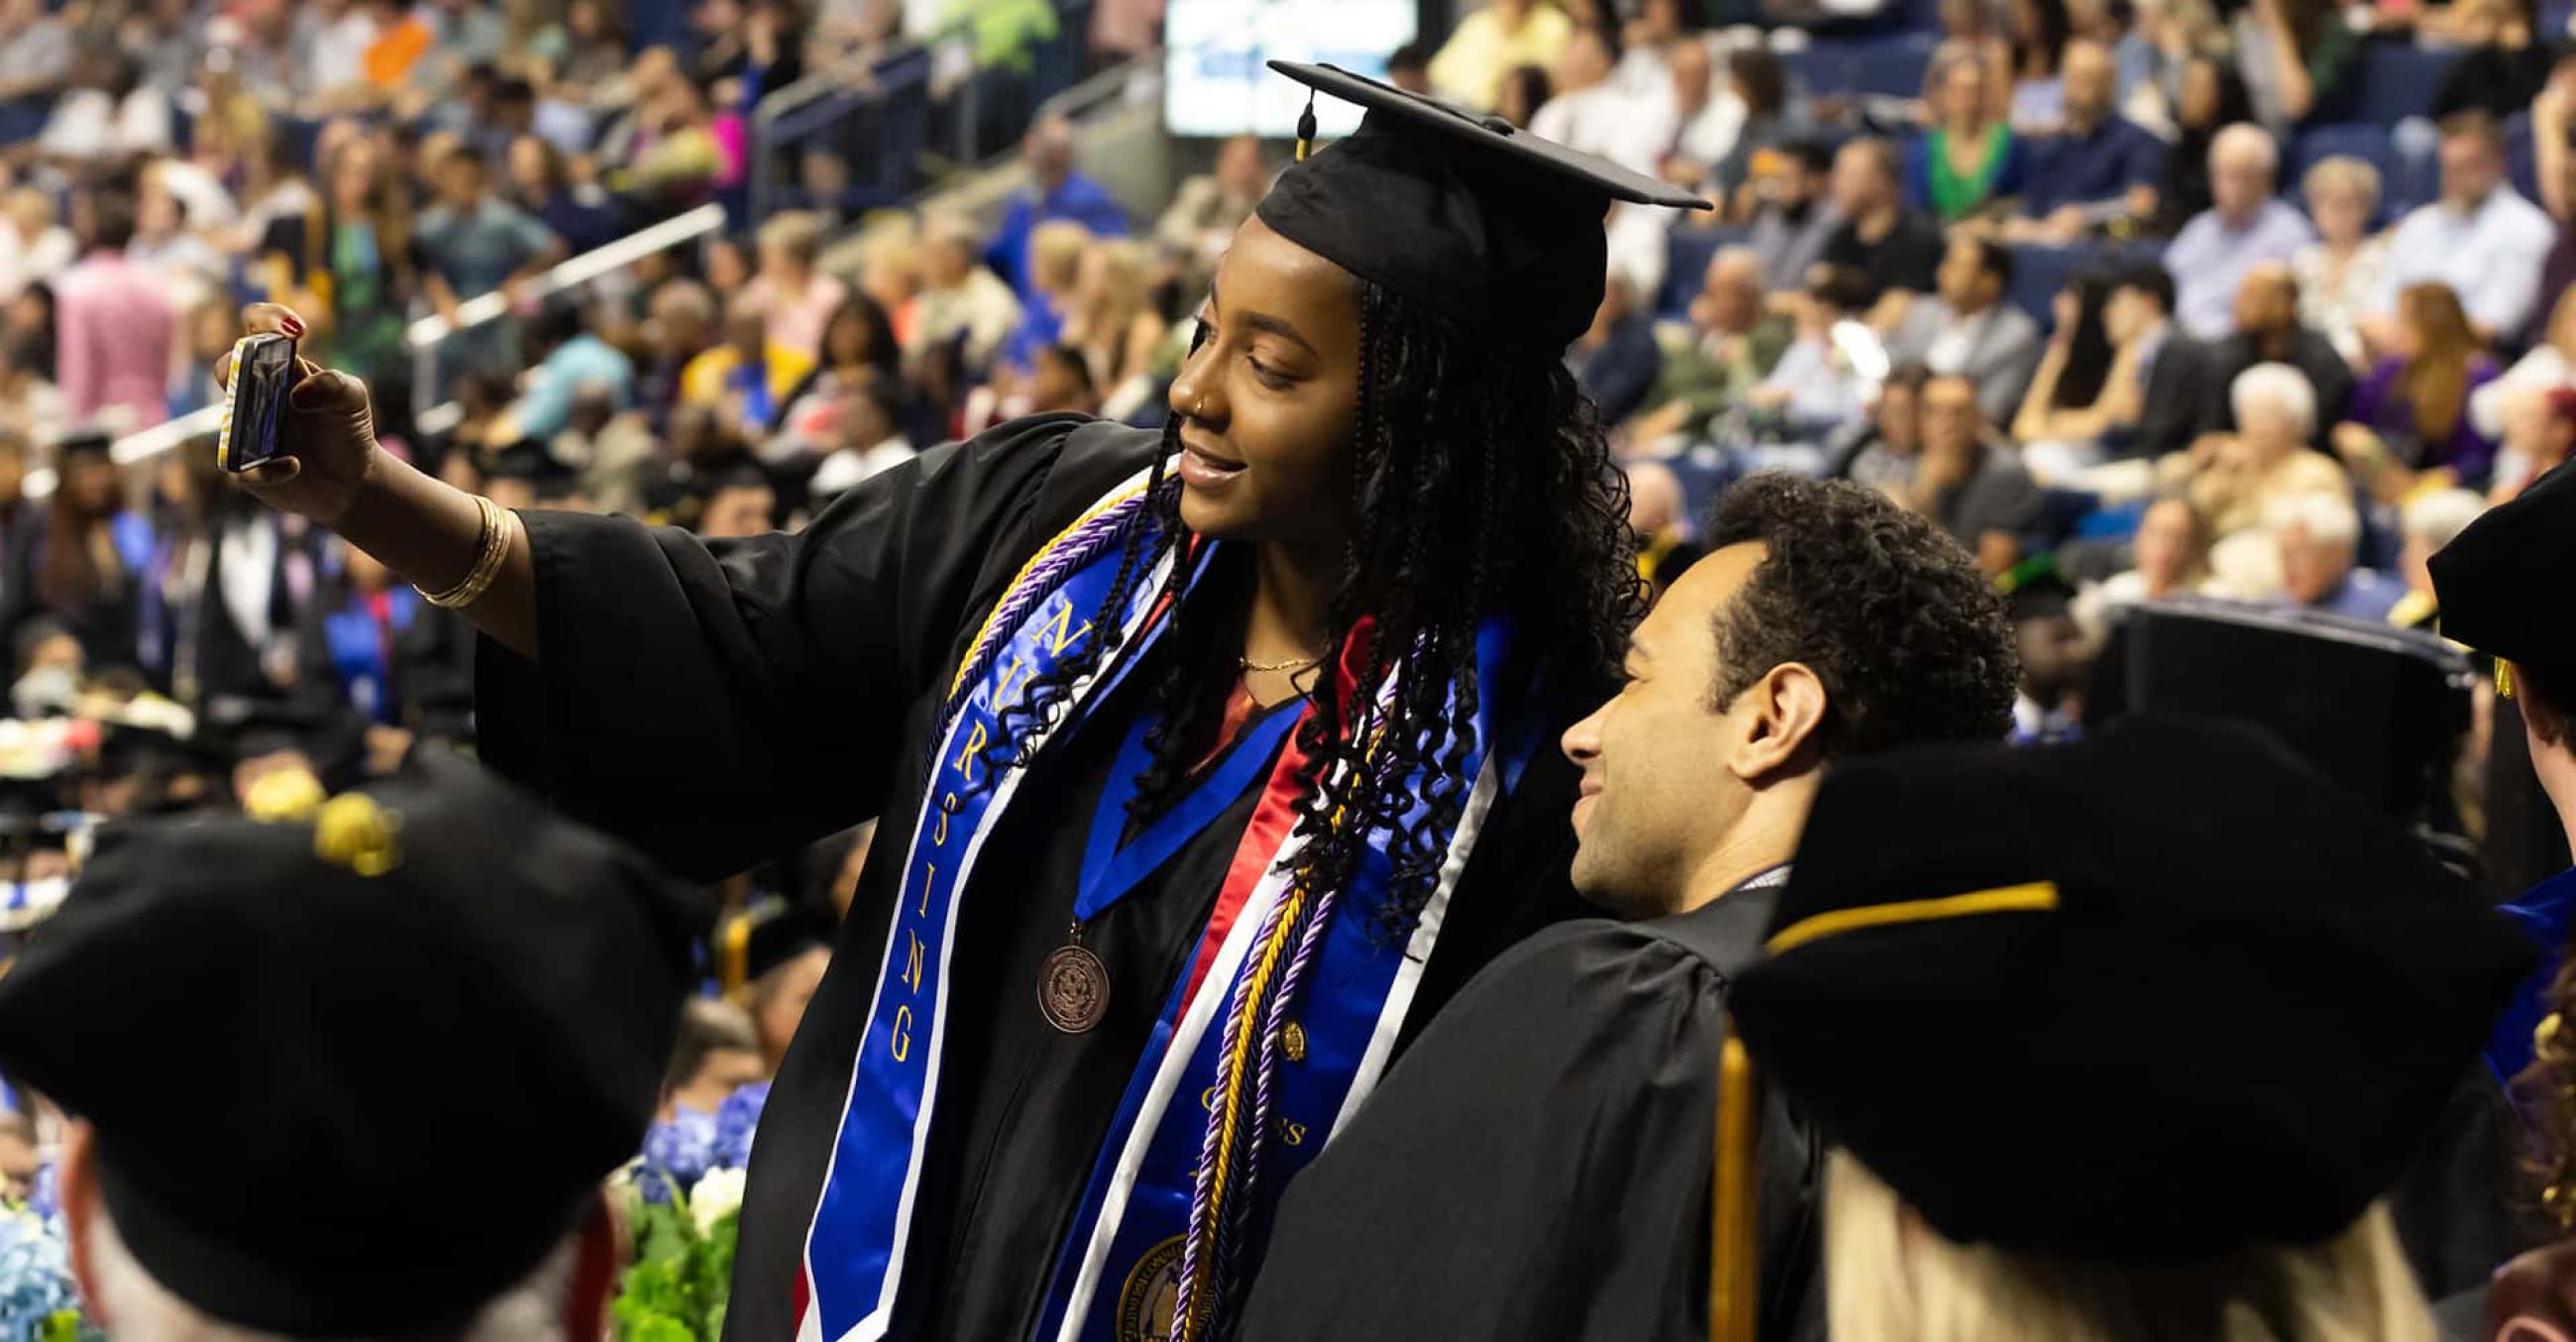 a student in cap and gown pauses to take a selfie with Commencement speaker Corbin Bleu